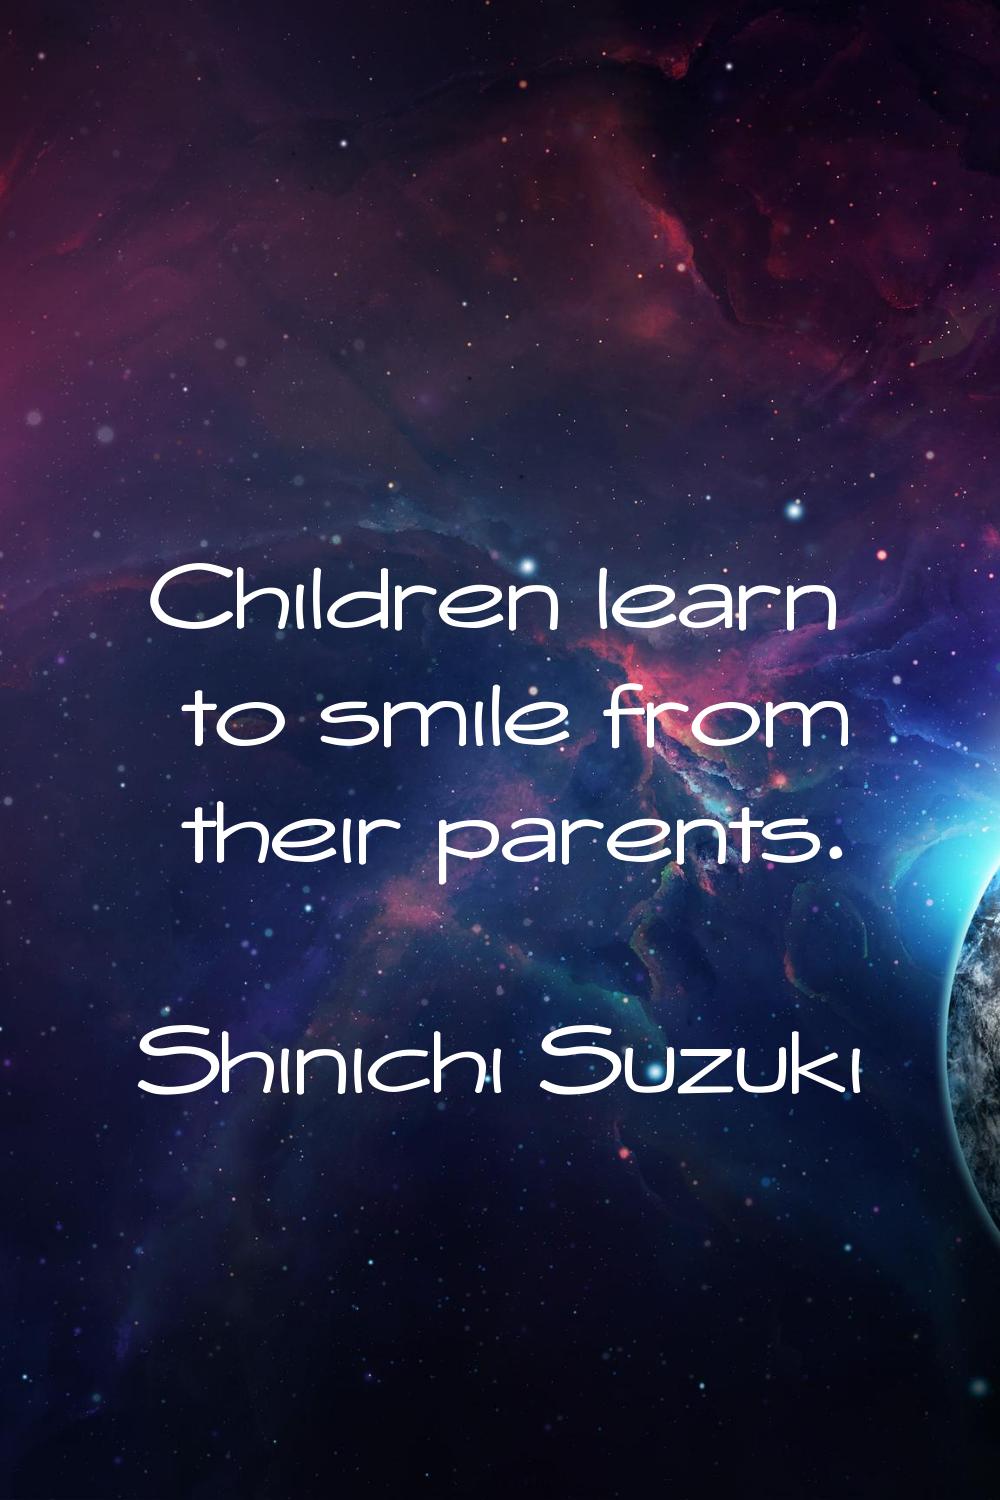 Children learn to smile from their parents.